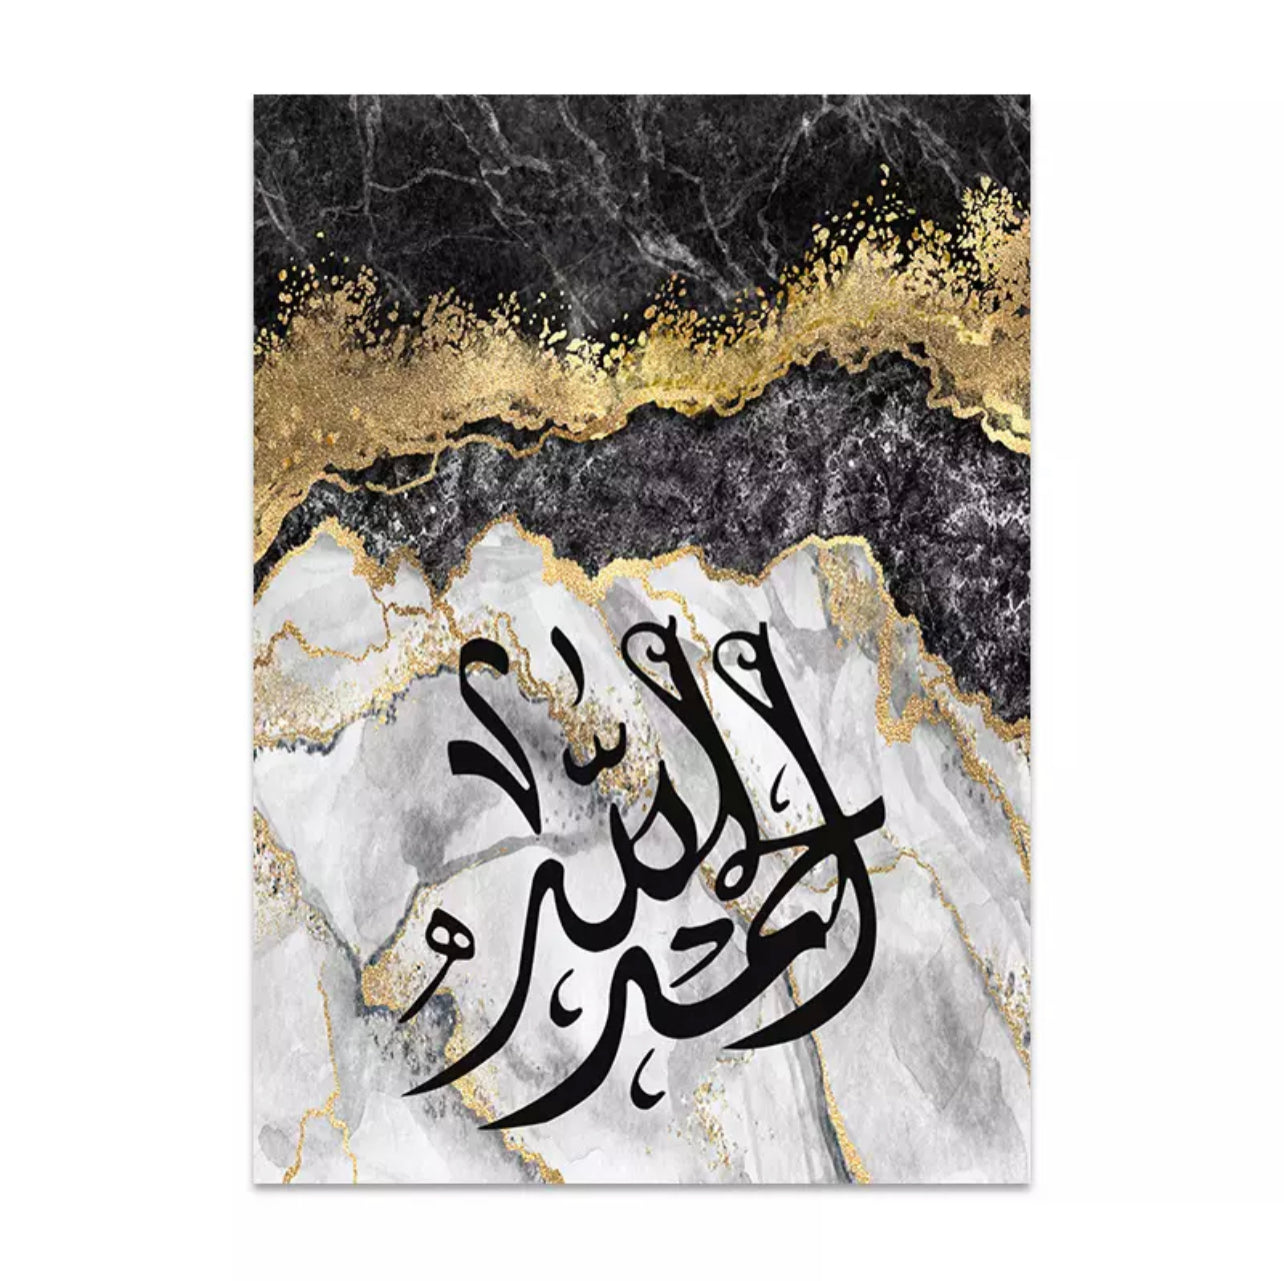 Blue | Pink | Black Marble Shower Background With Islamic Calligraphy